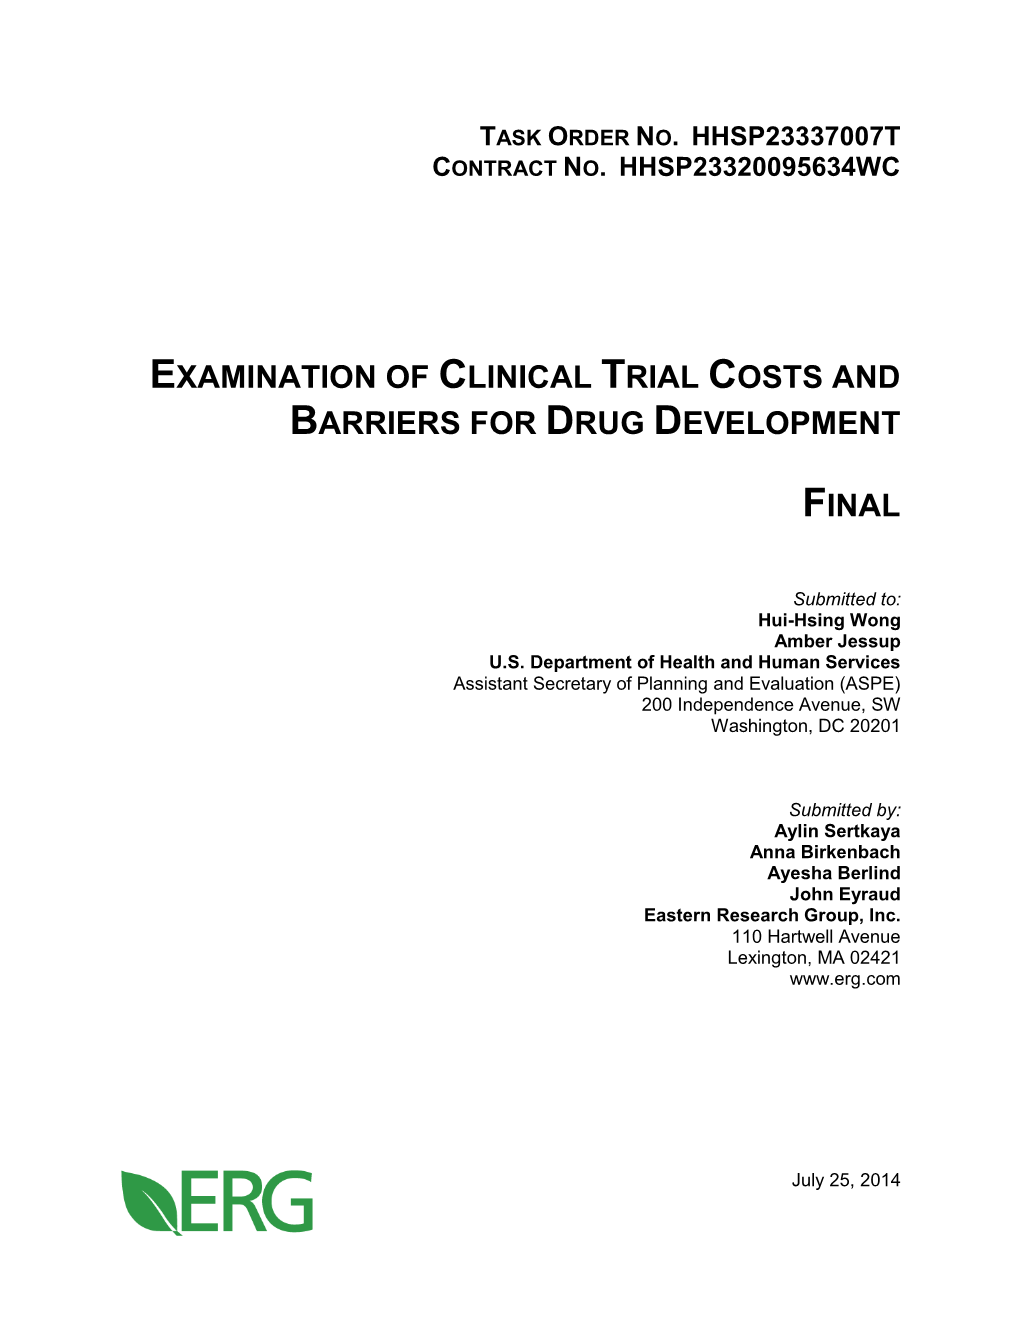 Examination of Clinical Trial Costs and Barriers for Drug Development Final